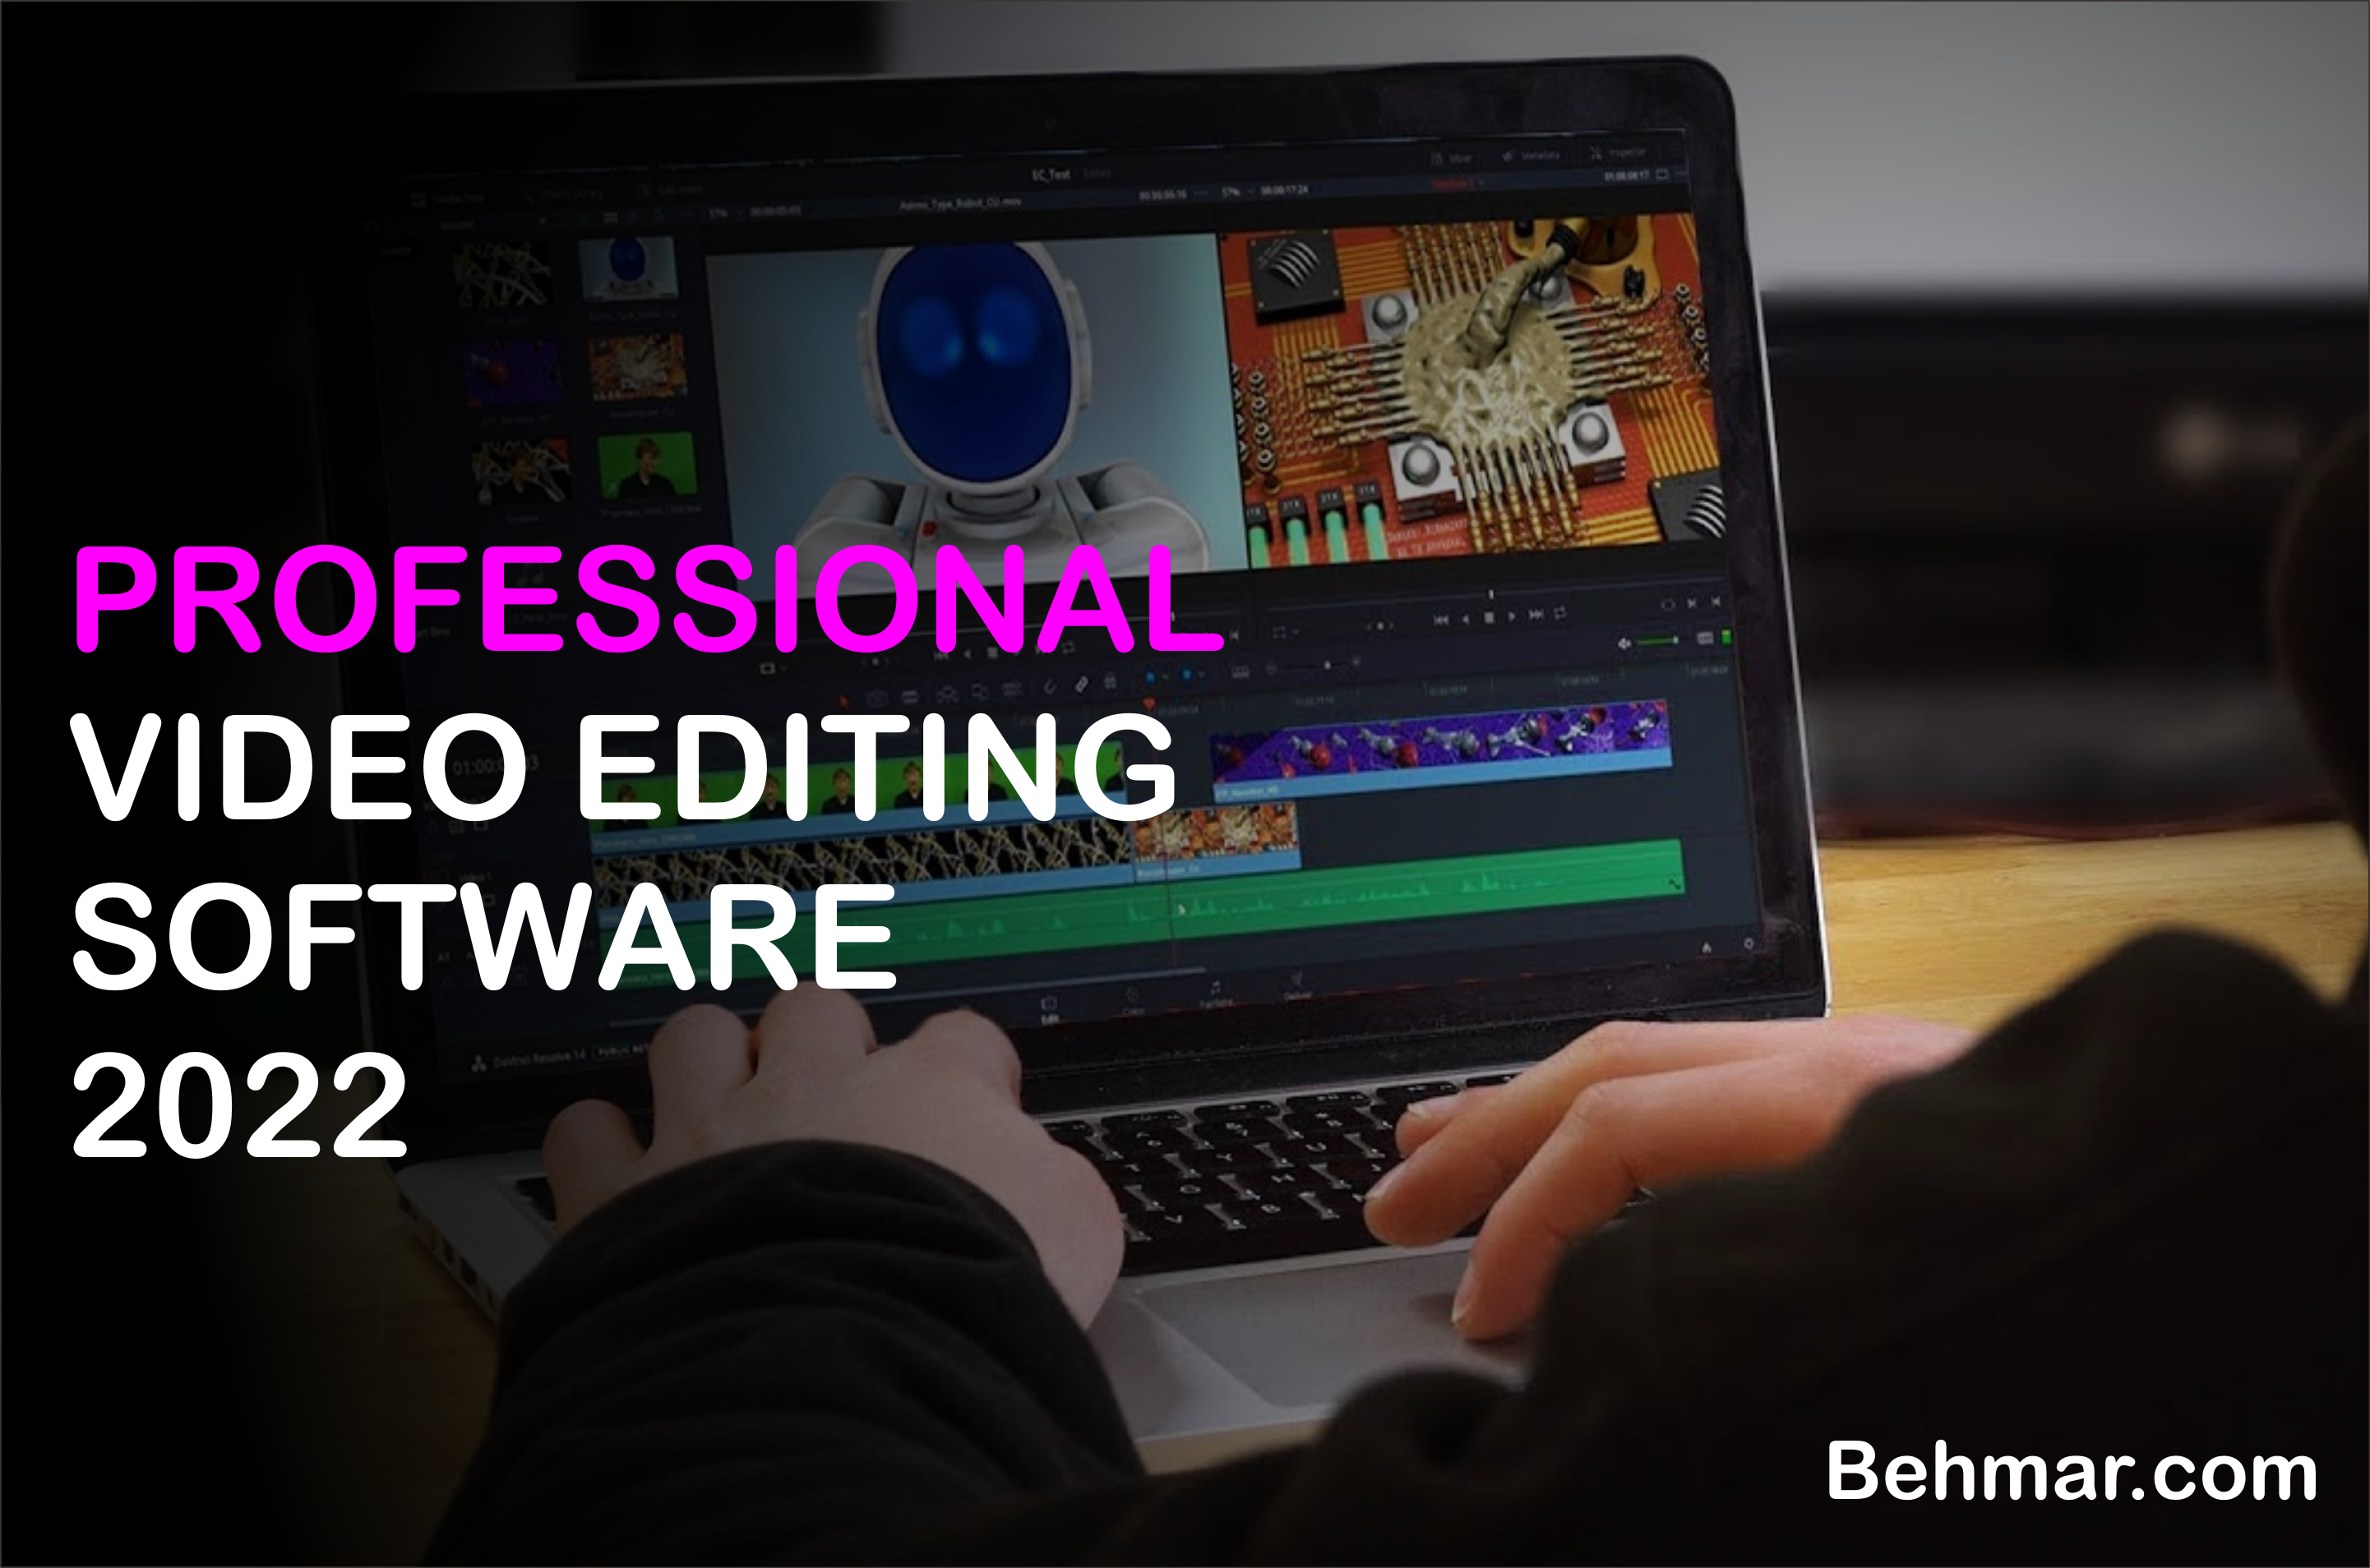 7 Best Video Editing Software in 2022